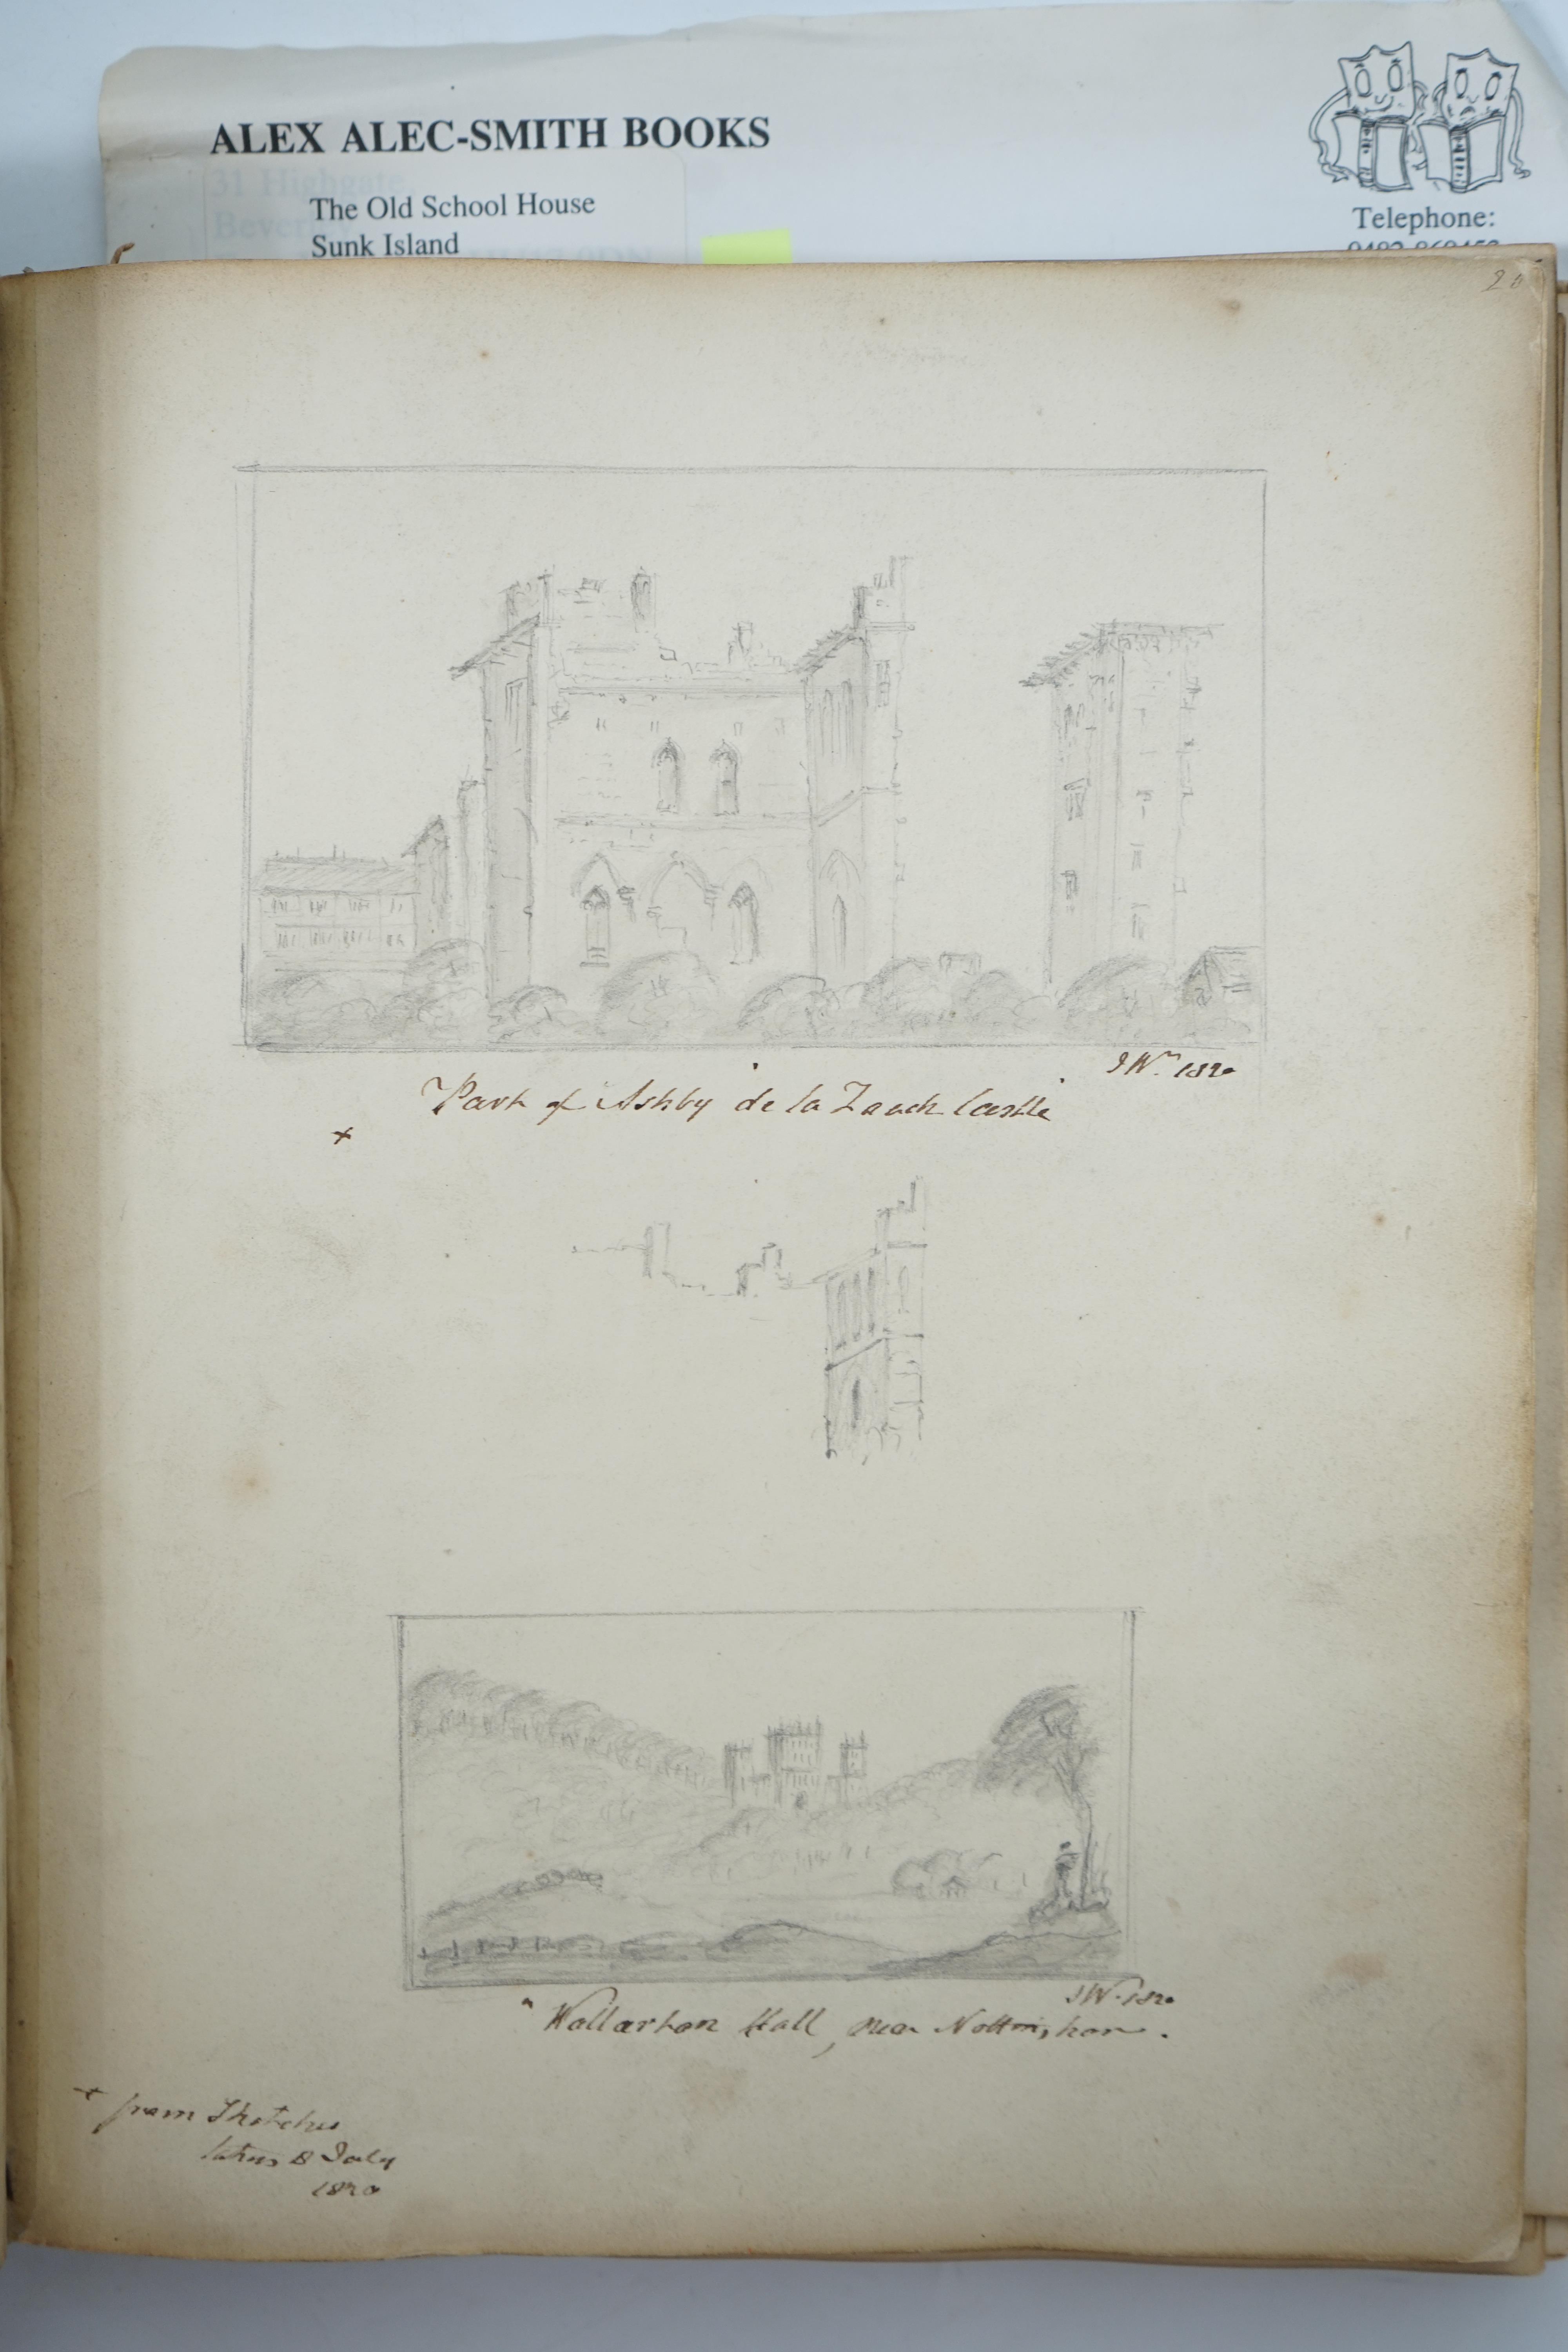 Commonplace book of verse, watercolours and sketches compiled by Mary Watson and her sister Eliza Watson of Farnsfield in Nottinghamshire, 1802-1820, subsequently augmented by William A Ross, 1850-1852